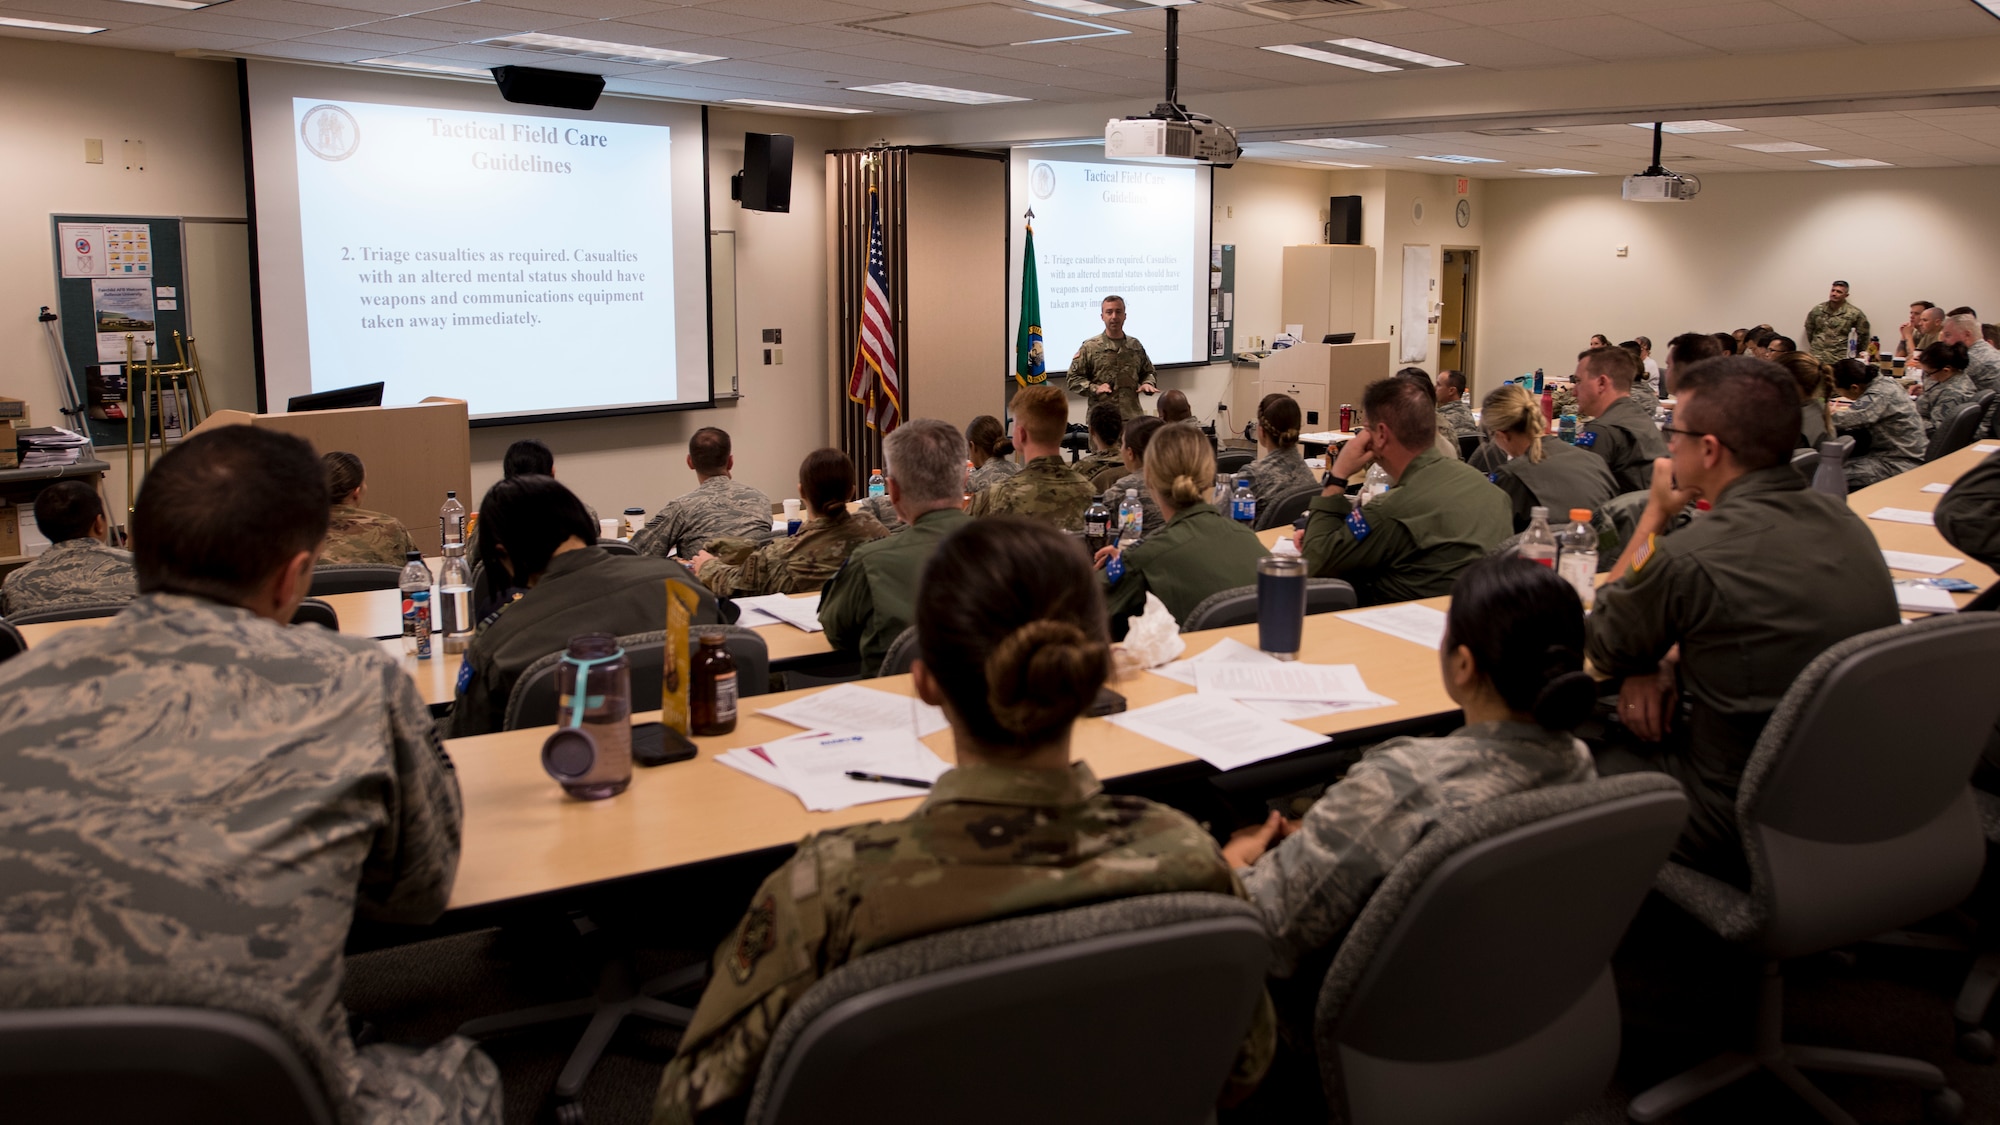 Students of the Tactical Combat Casualty Care course attend their first day of instruction by reviewing Department of Defense guidelines and current practices at Fairchild Air Force Base, Washington, Sept. 12, 2019. The TCCC is the replacement for the former Self-Aid Buddy Care training and will become the new standard across all U.S. military service branches. (U.S. Air Force photo by Senior Airman Ryan Lackey)